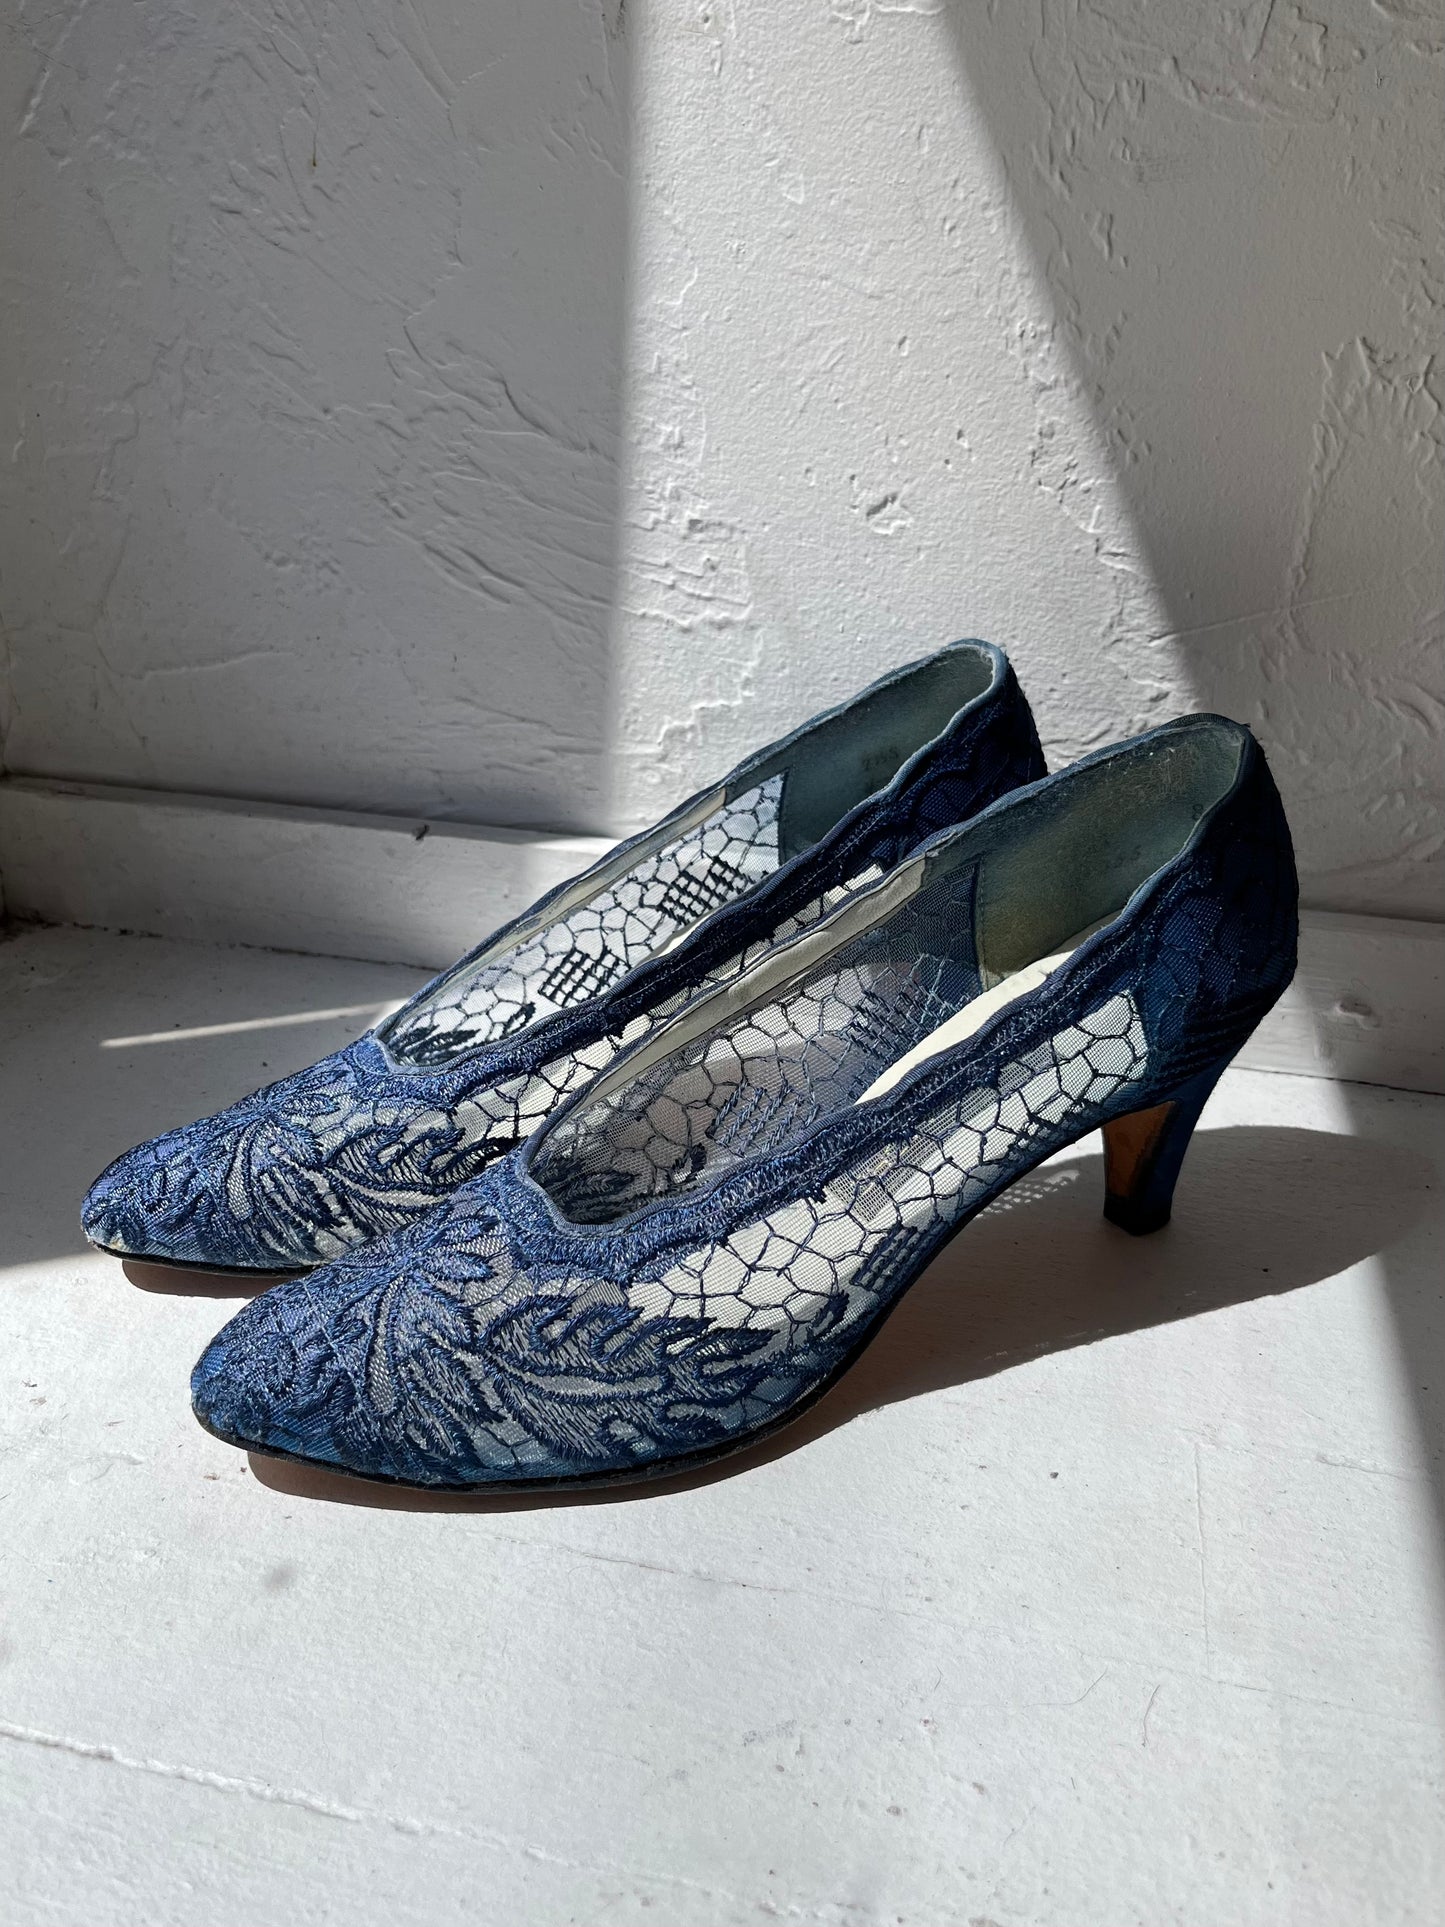 Vintage 'Frank More' Blue Illusion Lace Pointed Toe Heels / Size 7